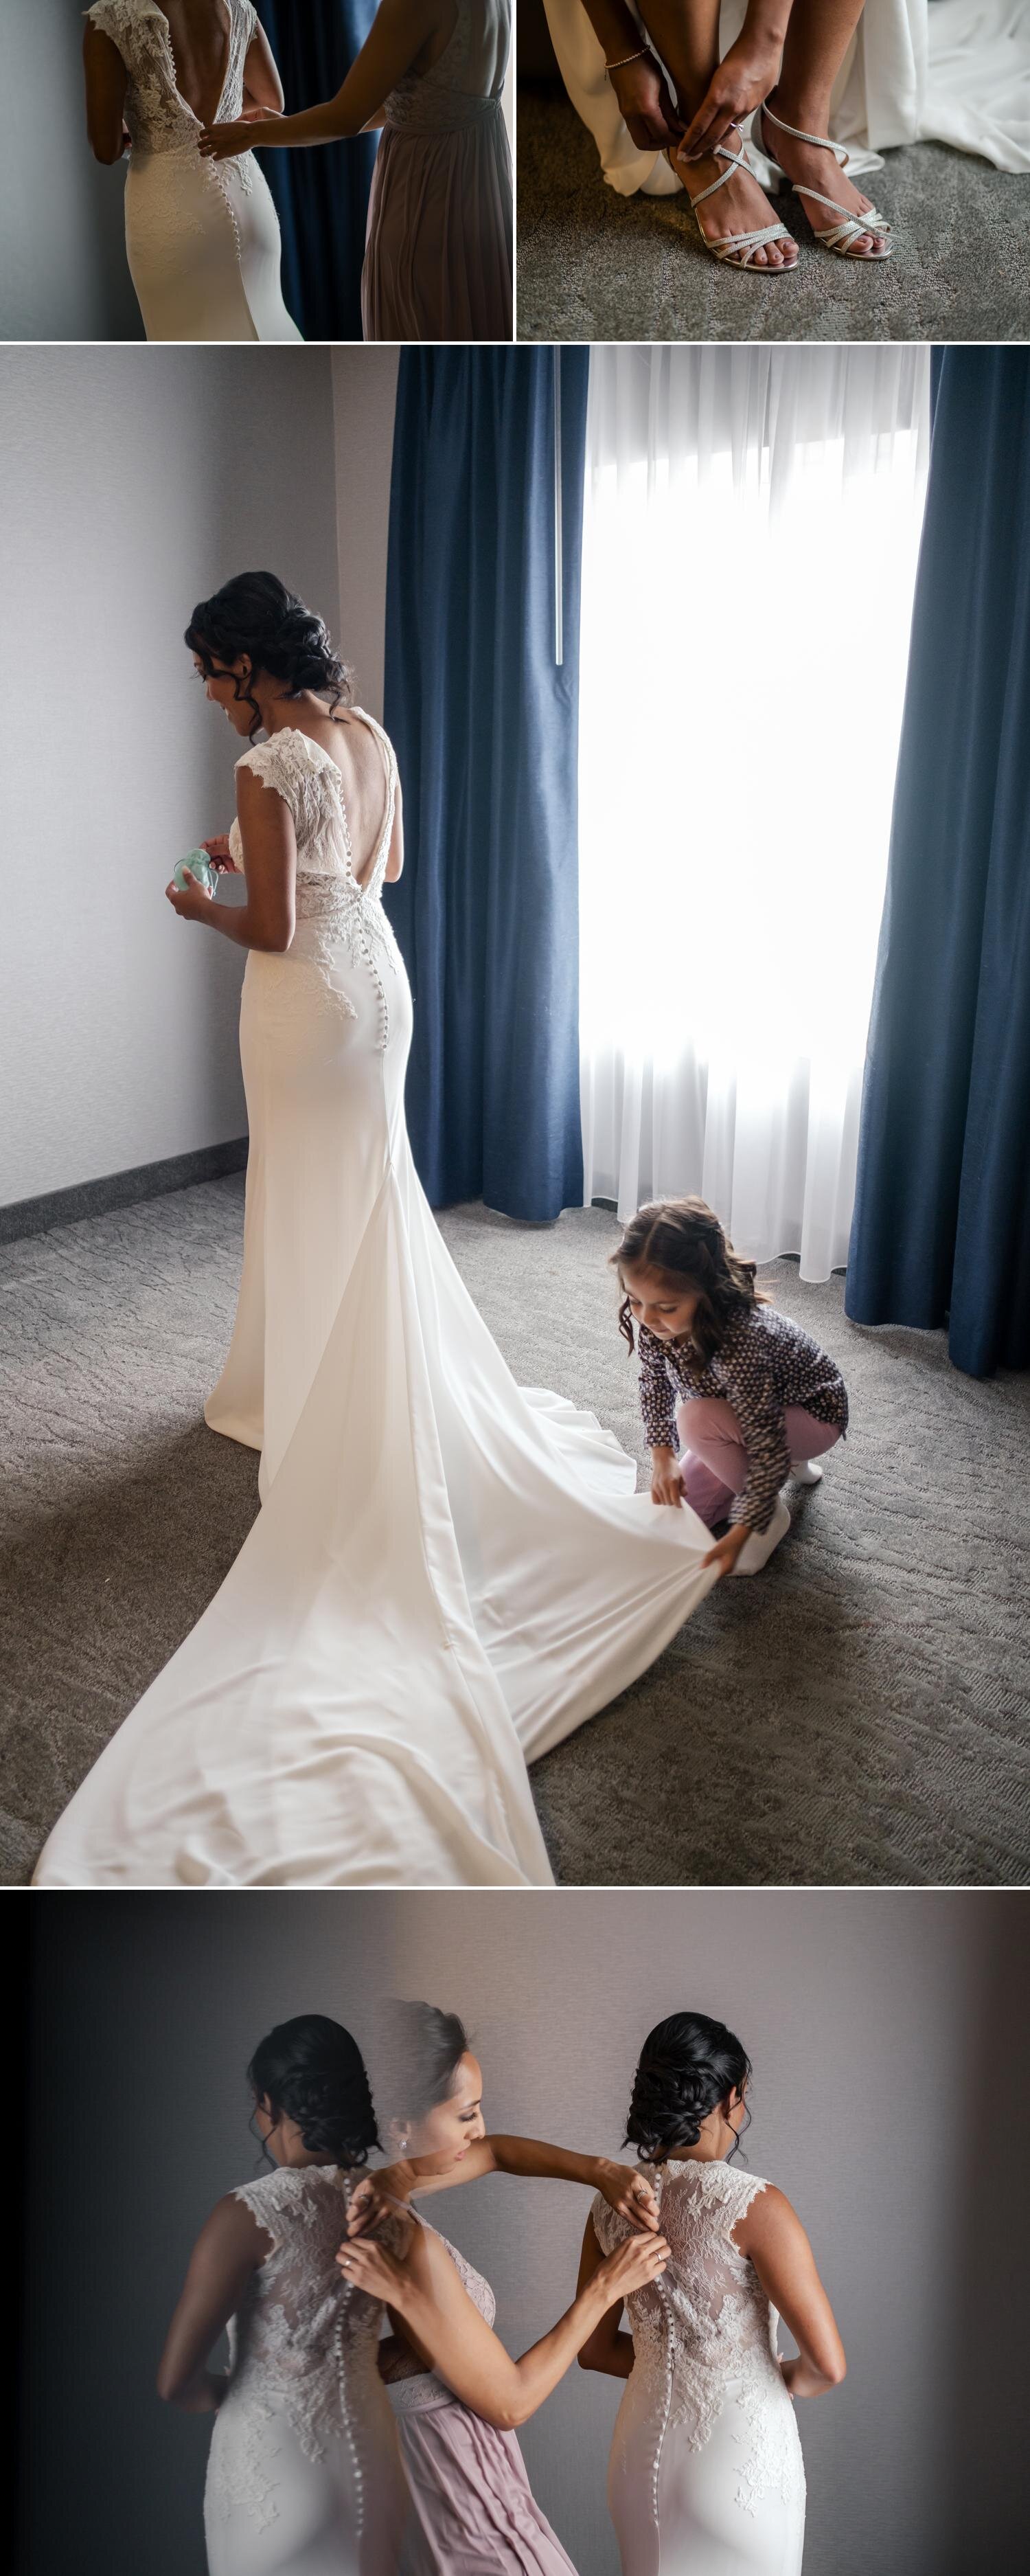 photos of a bride putting on her wedding dress